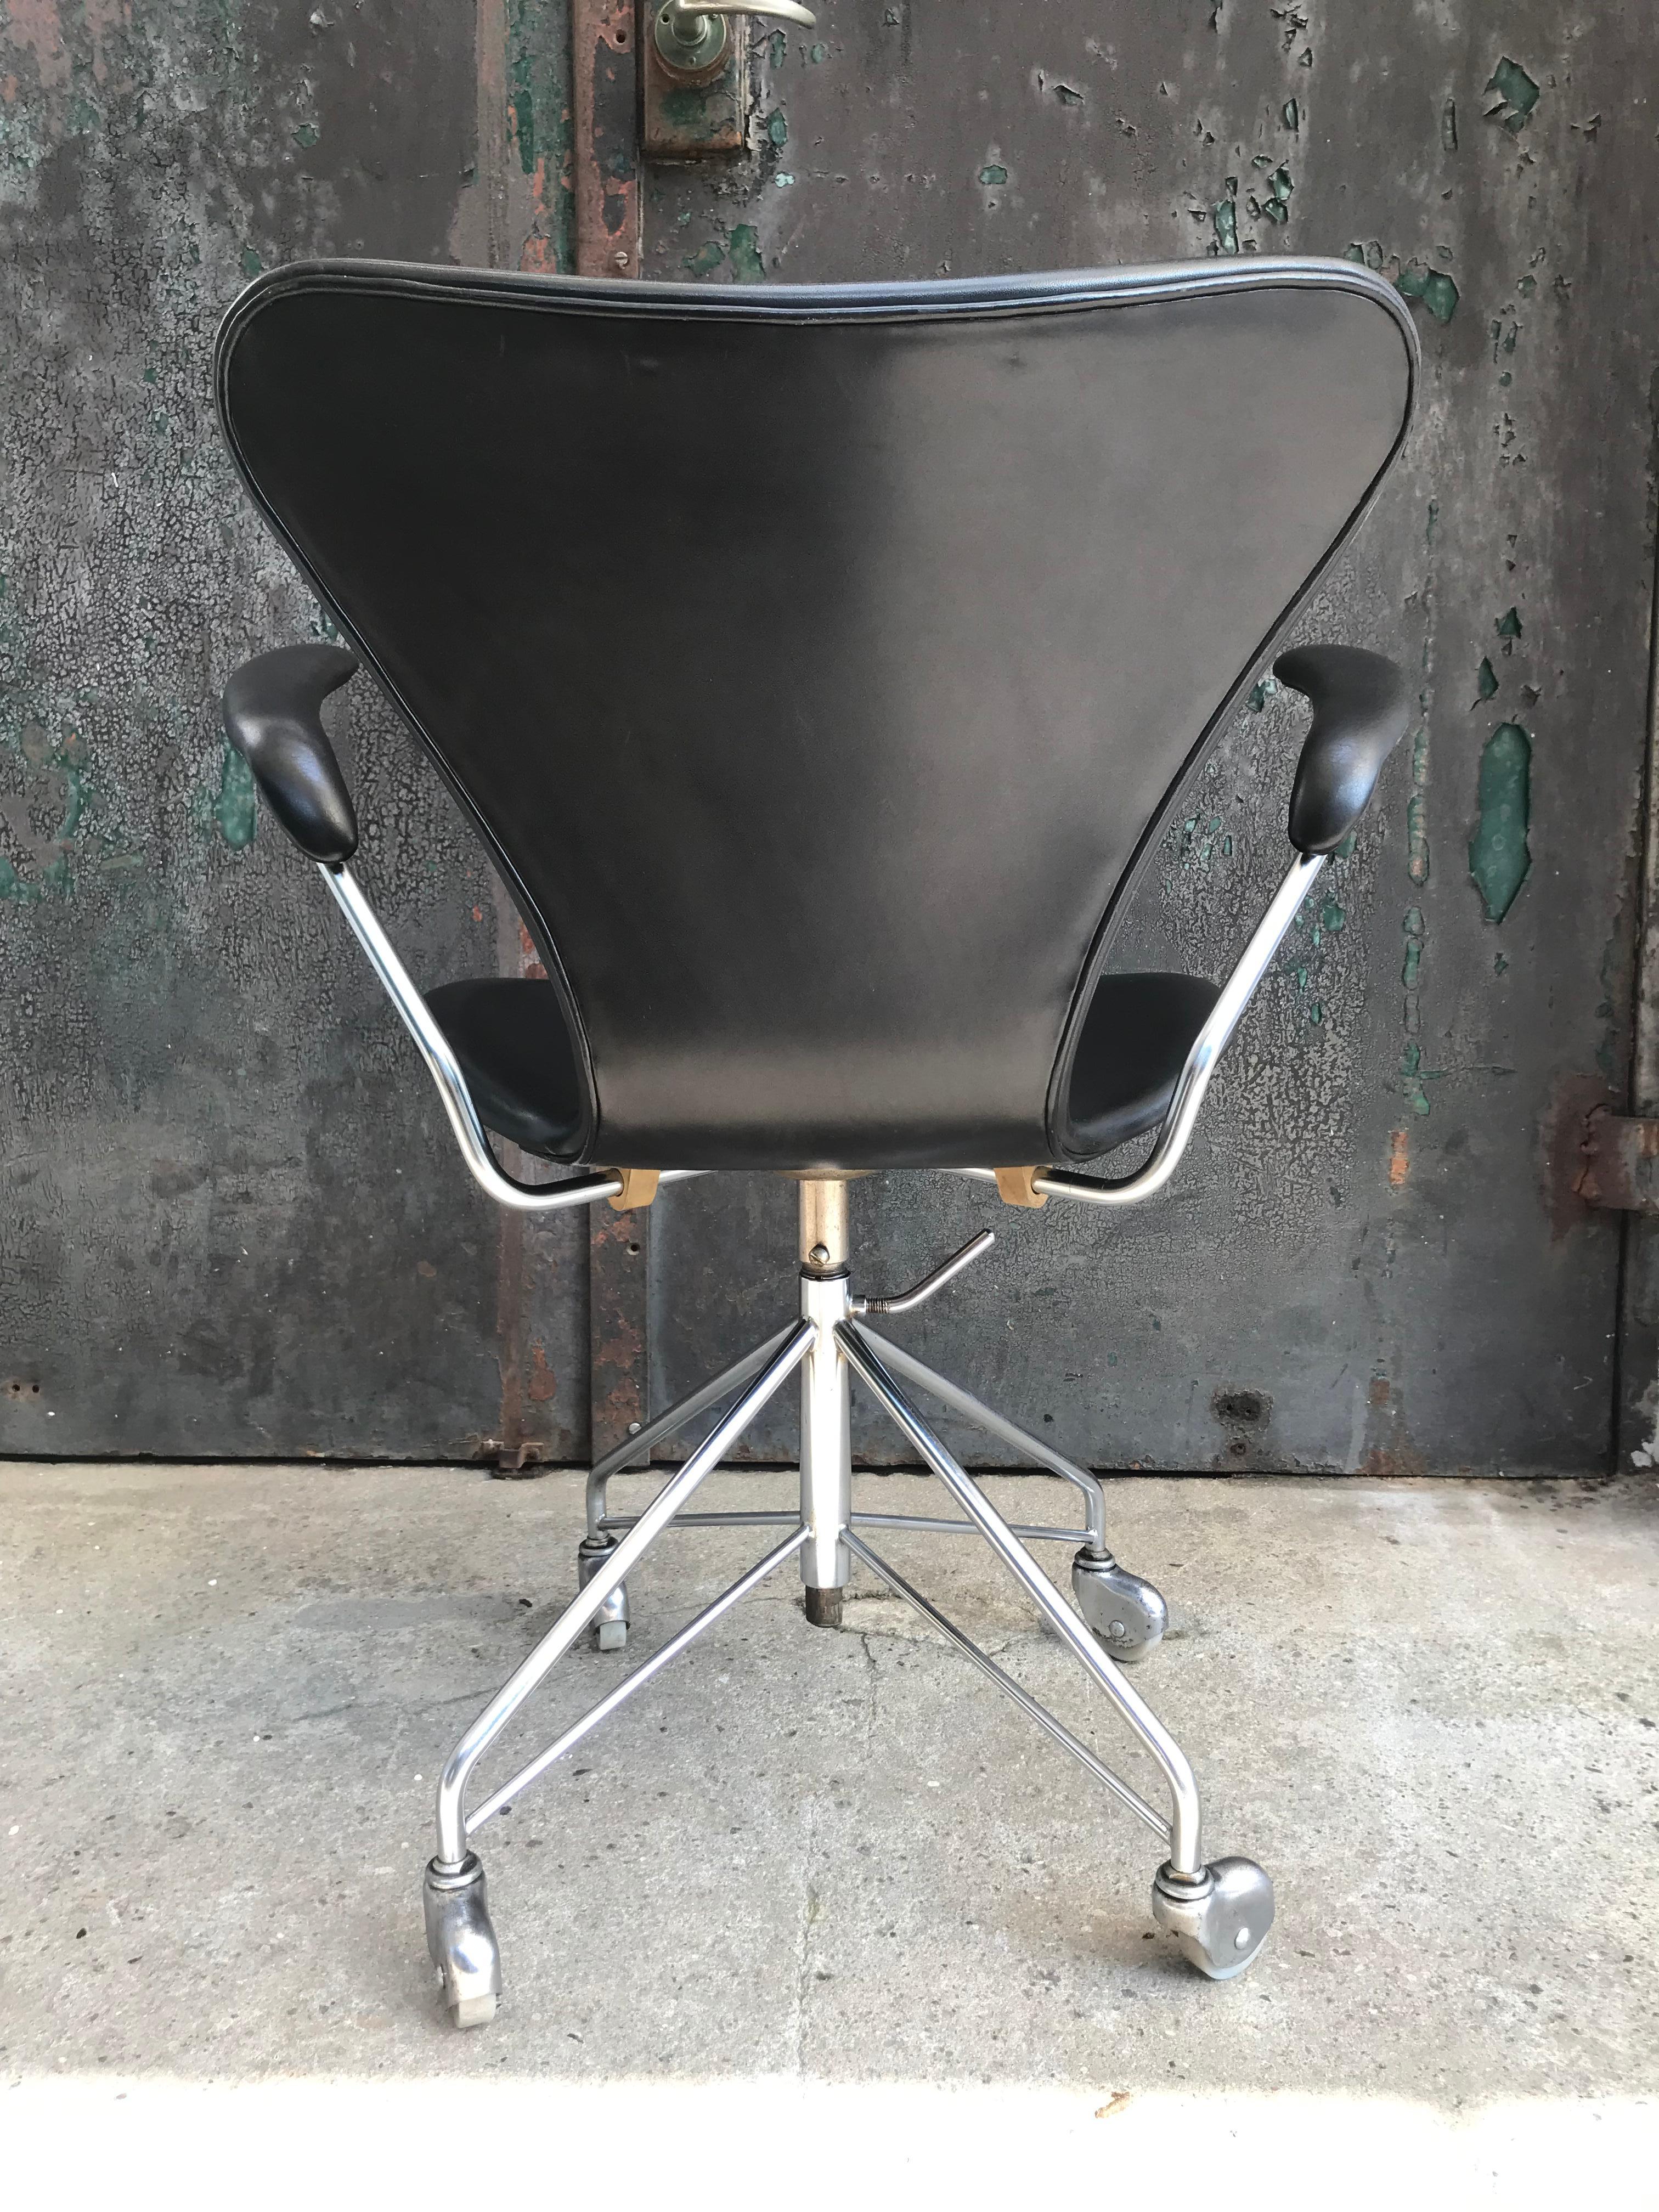 Hand-Crafted Vintage Arne Jacobsen Office Swivel Stool Chair Model 3217 by Fritz Hansen